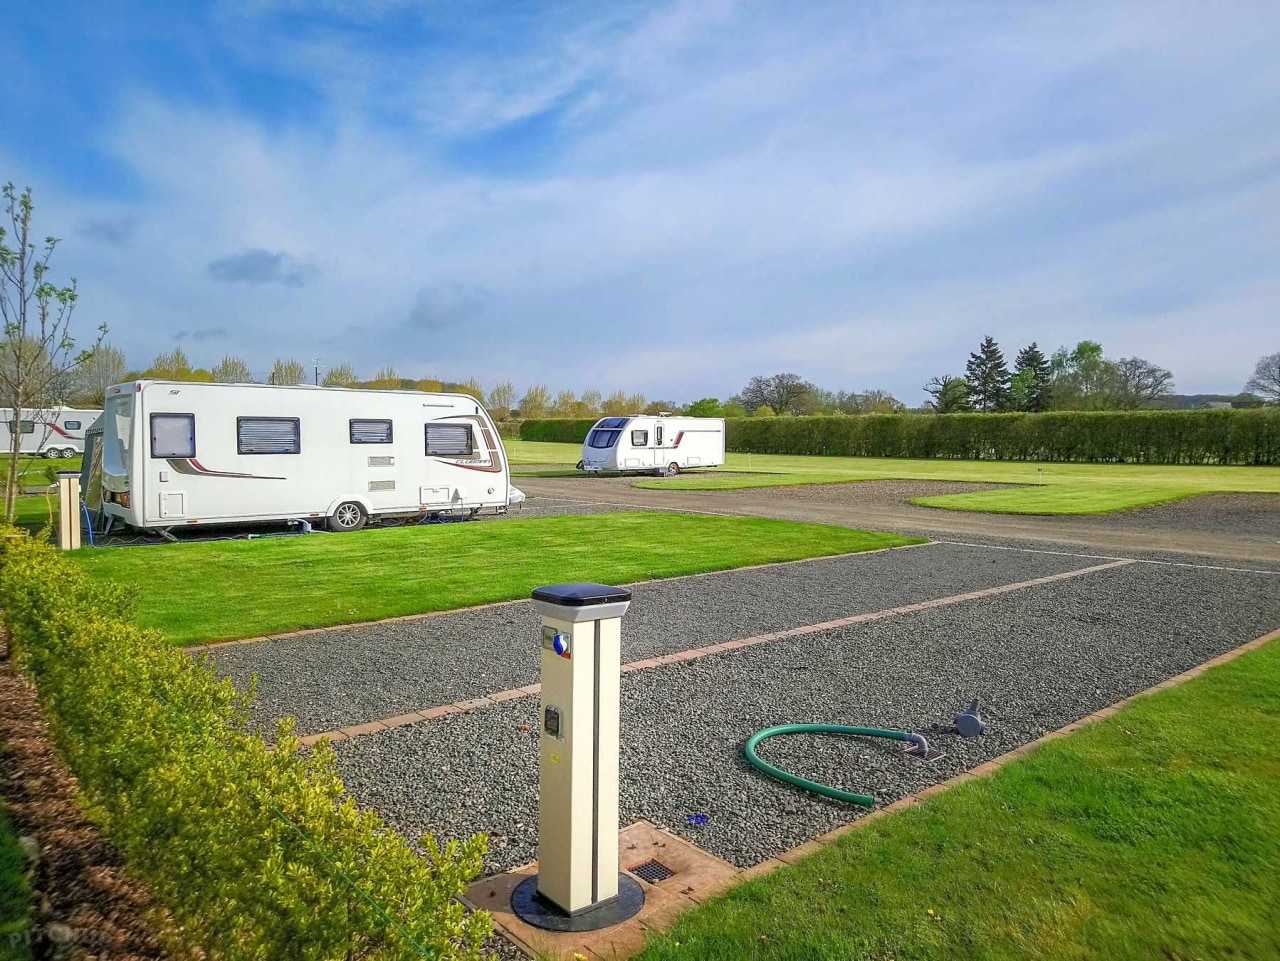 Caravan pitches with an electric hook-up point